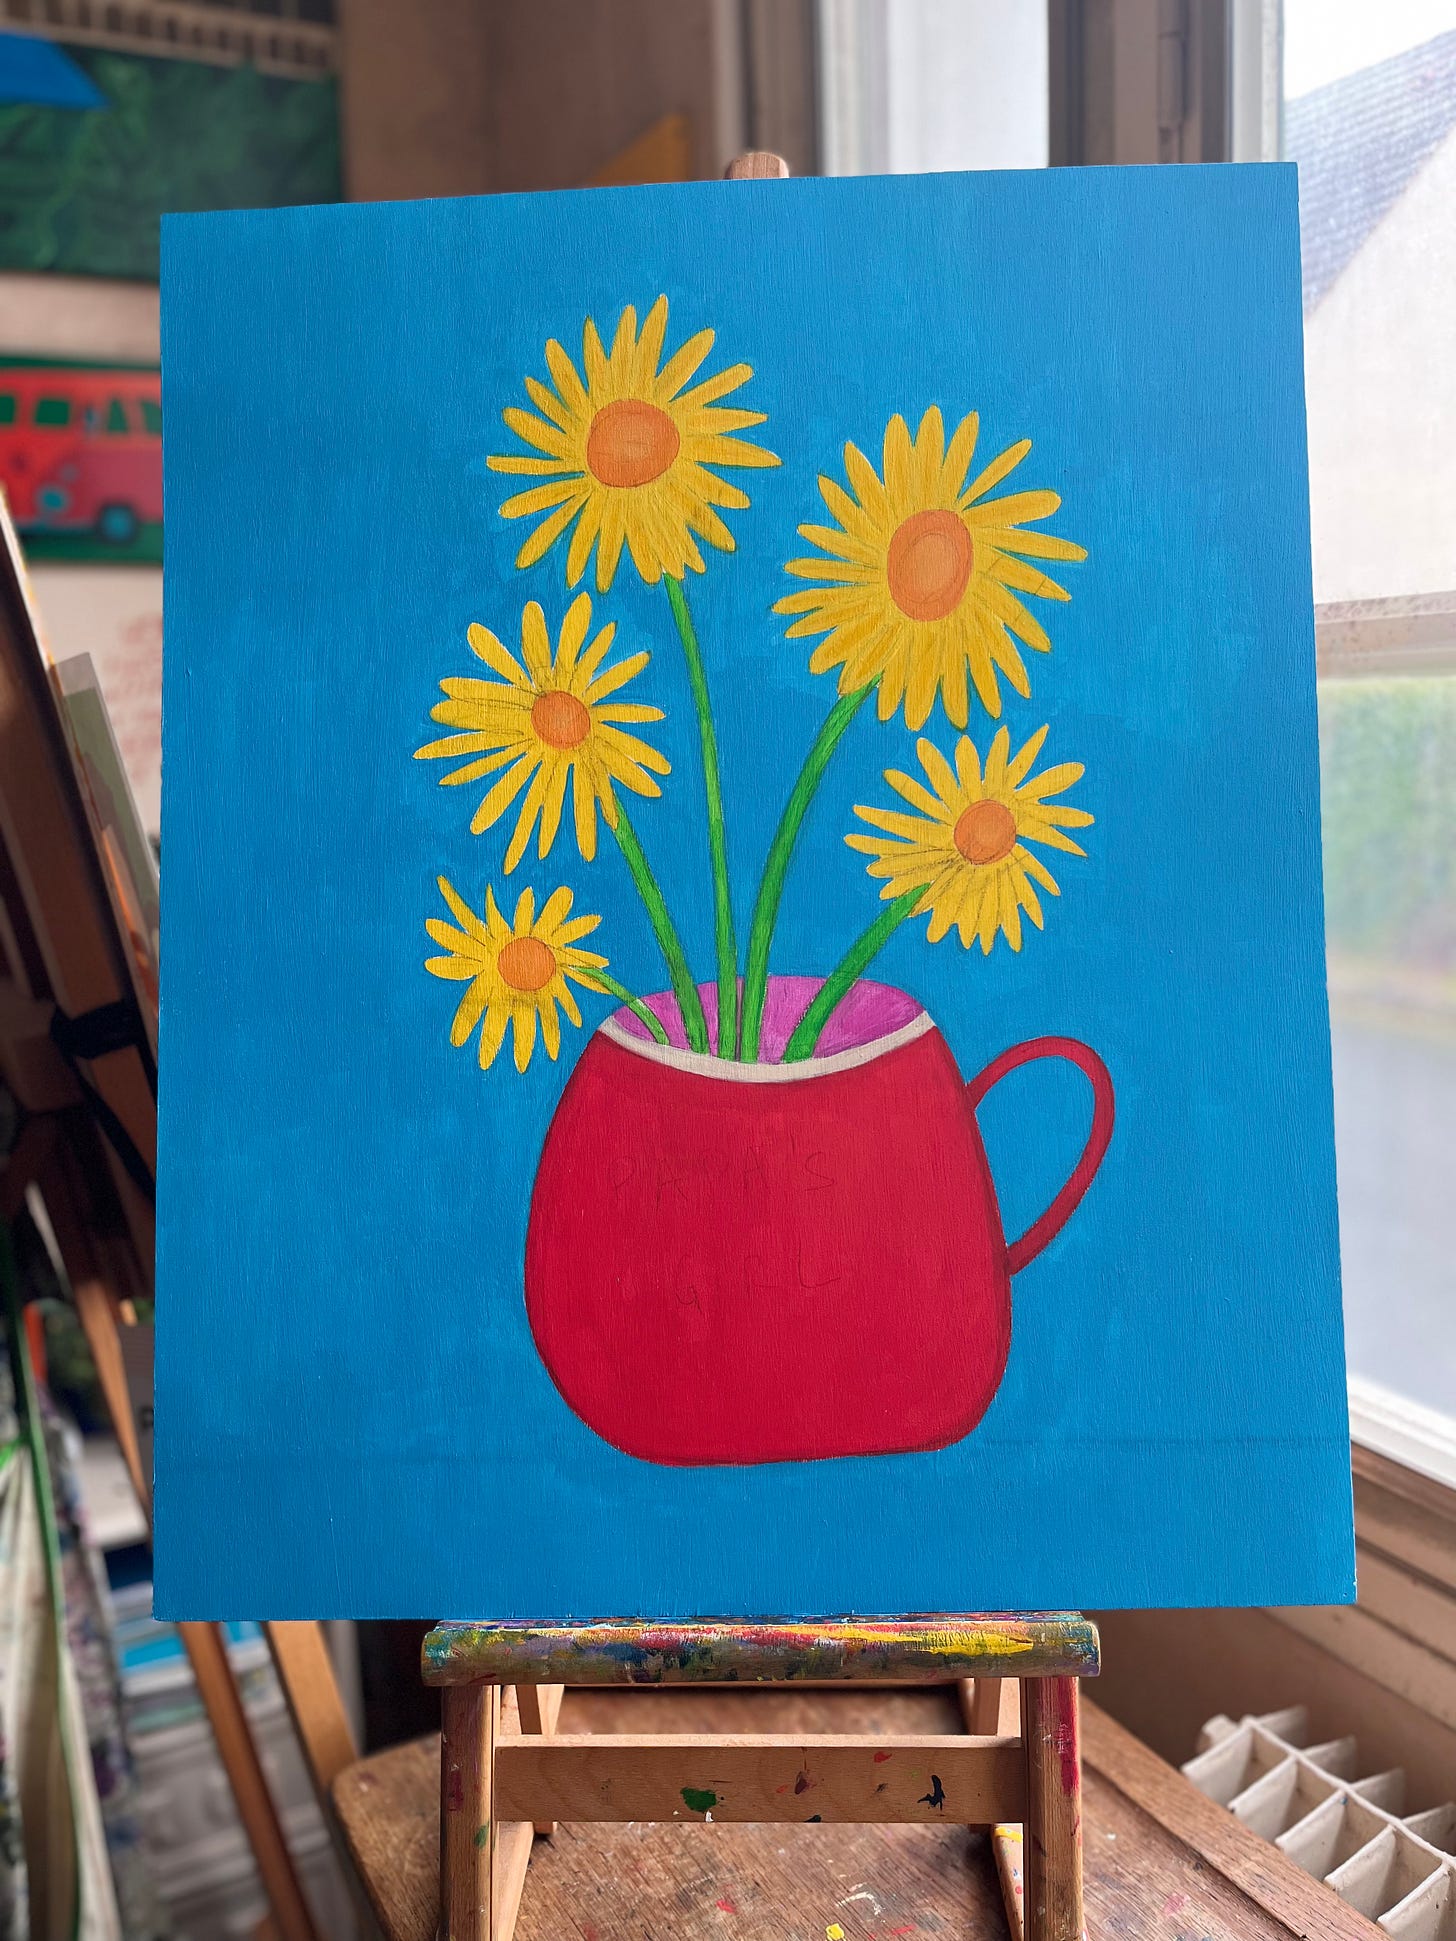 A painting of five yellow flowers in a red cup on a blue background